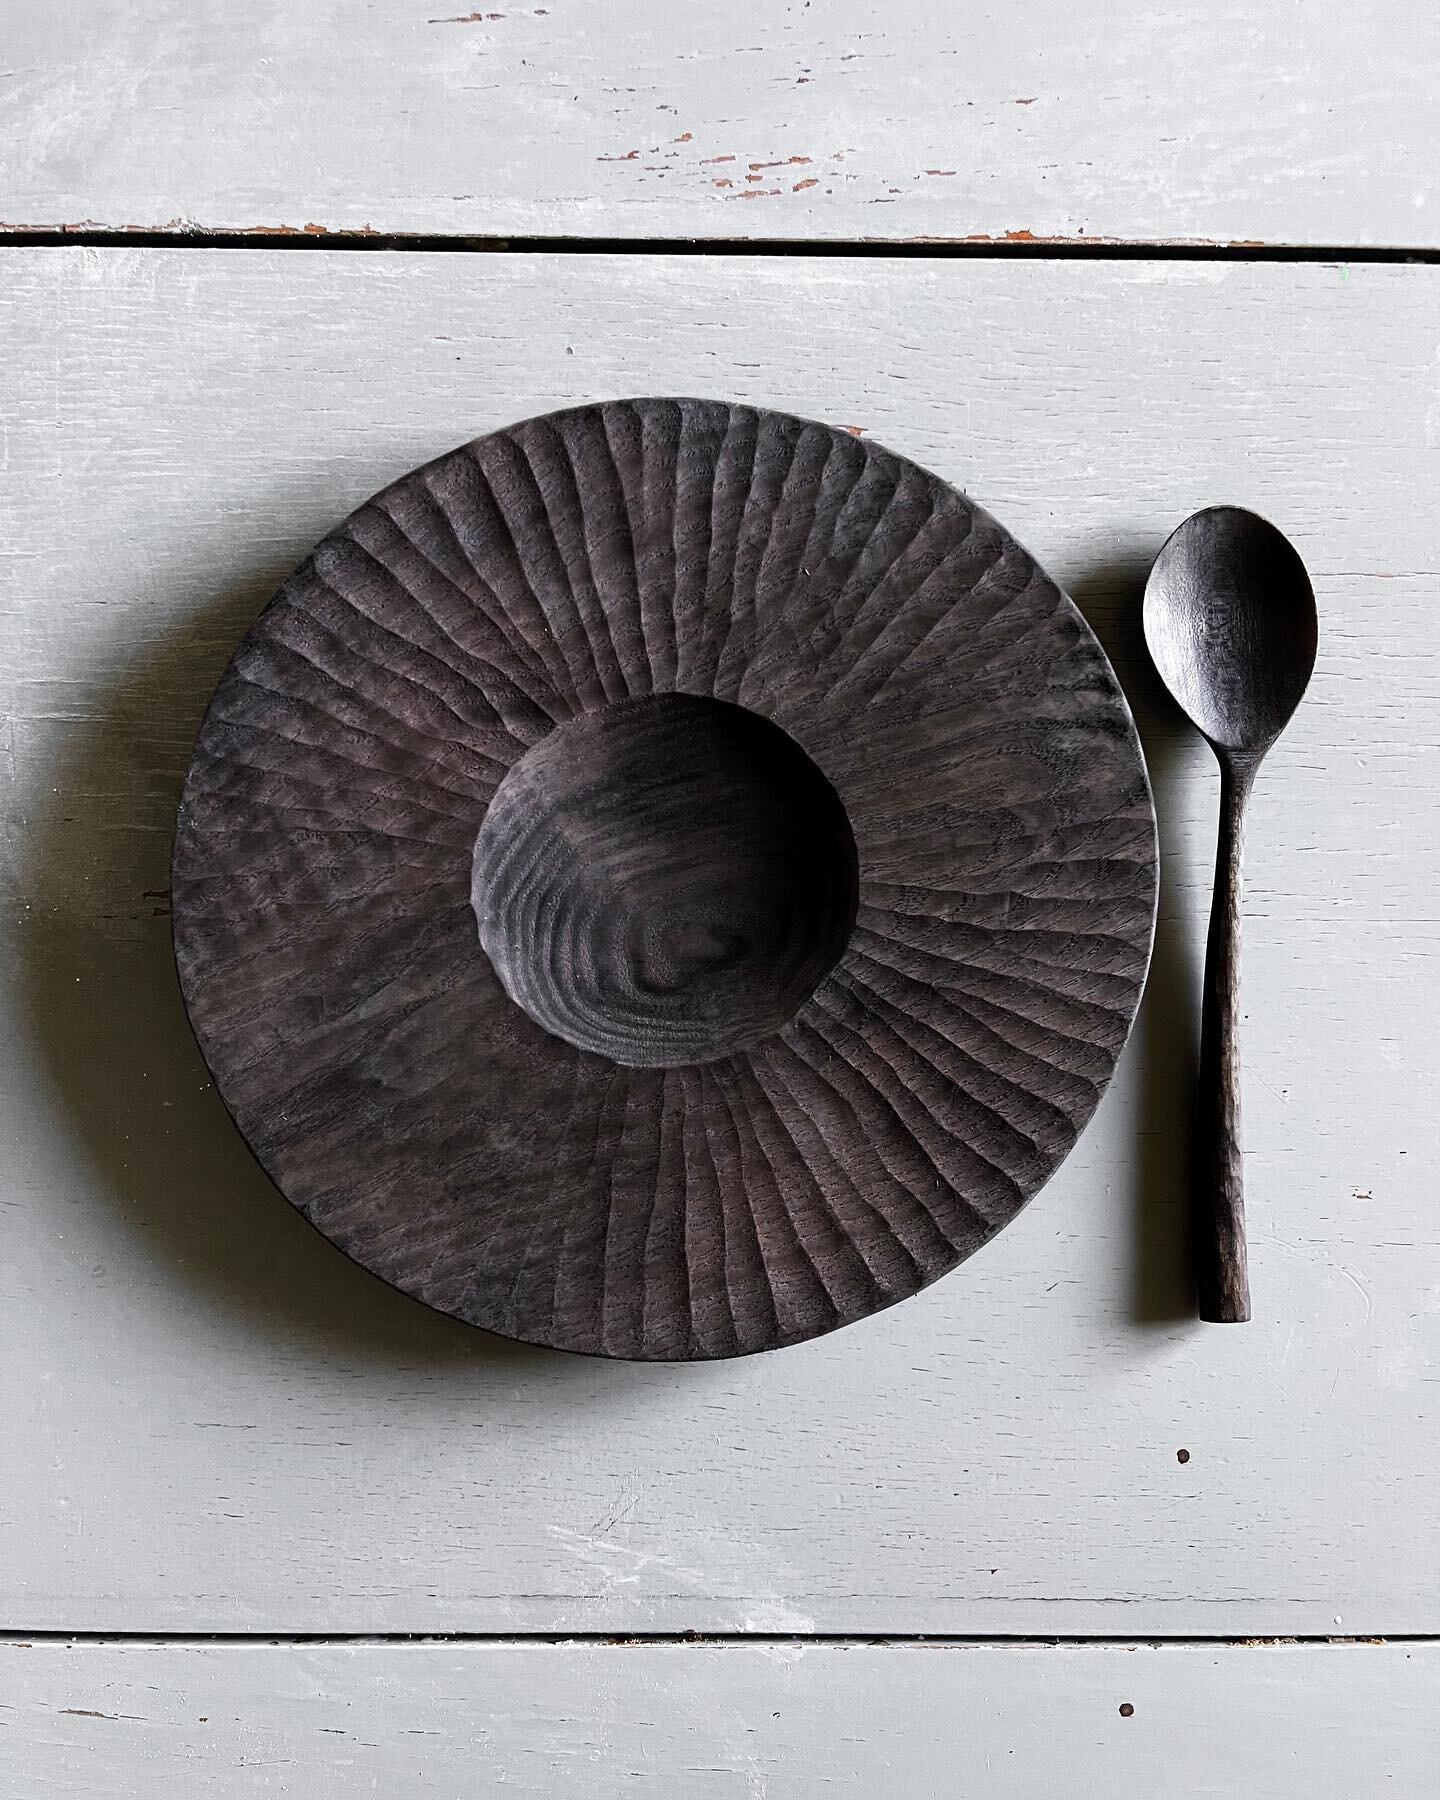 Cherry spoon, ash plate. Both ebonized (but not yet oiled, which&rsquo;ll add even more depth to the coloring). 
.
.
#woodenplate #woodenspoon #carvedplate #carvedspoon #ebonizedwood